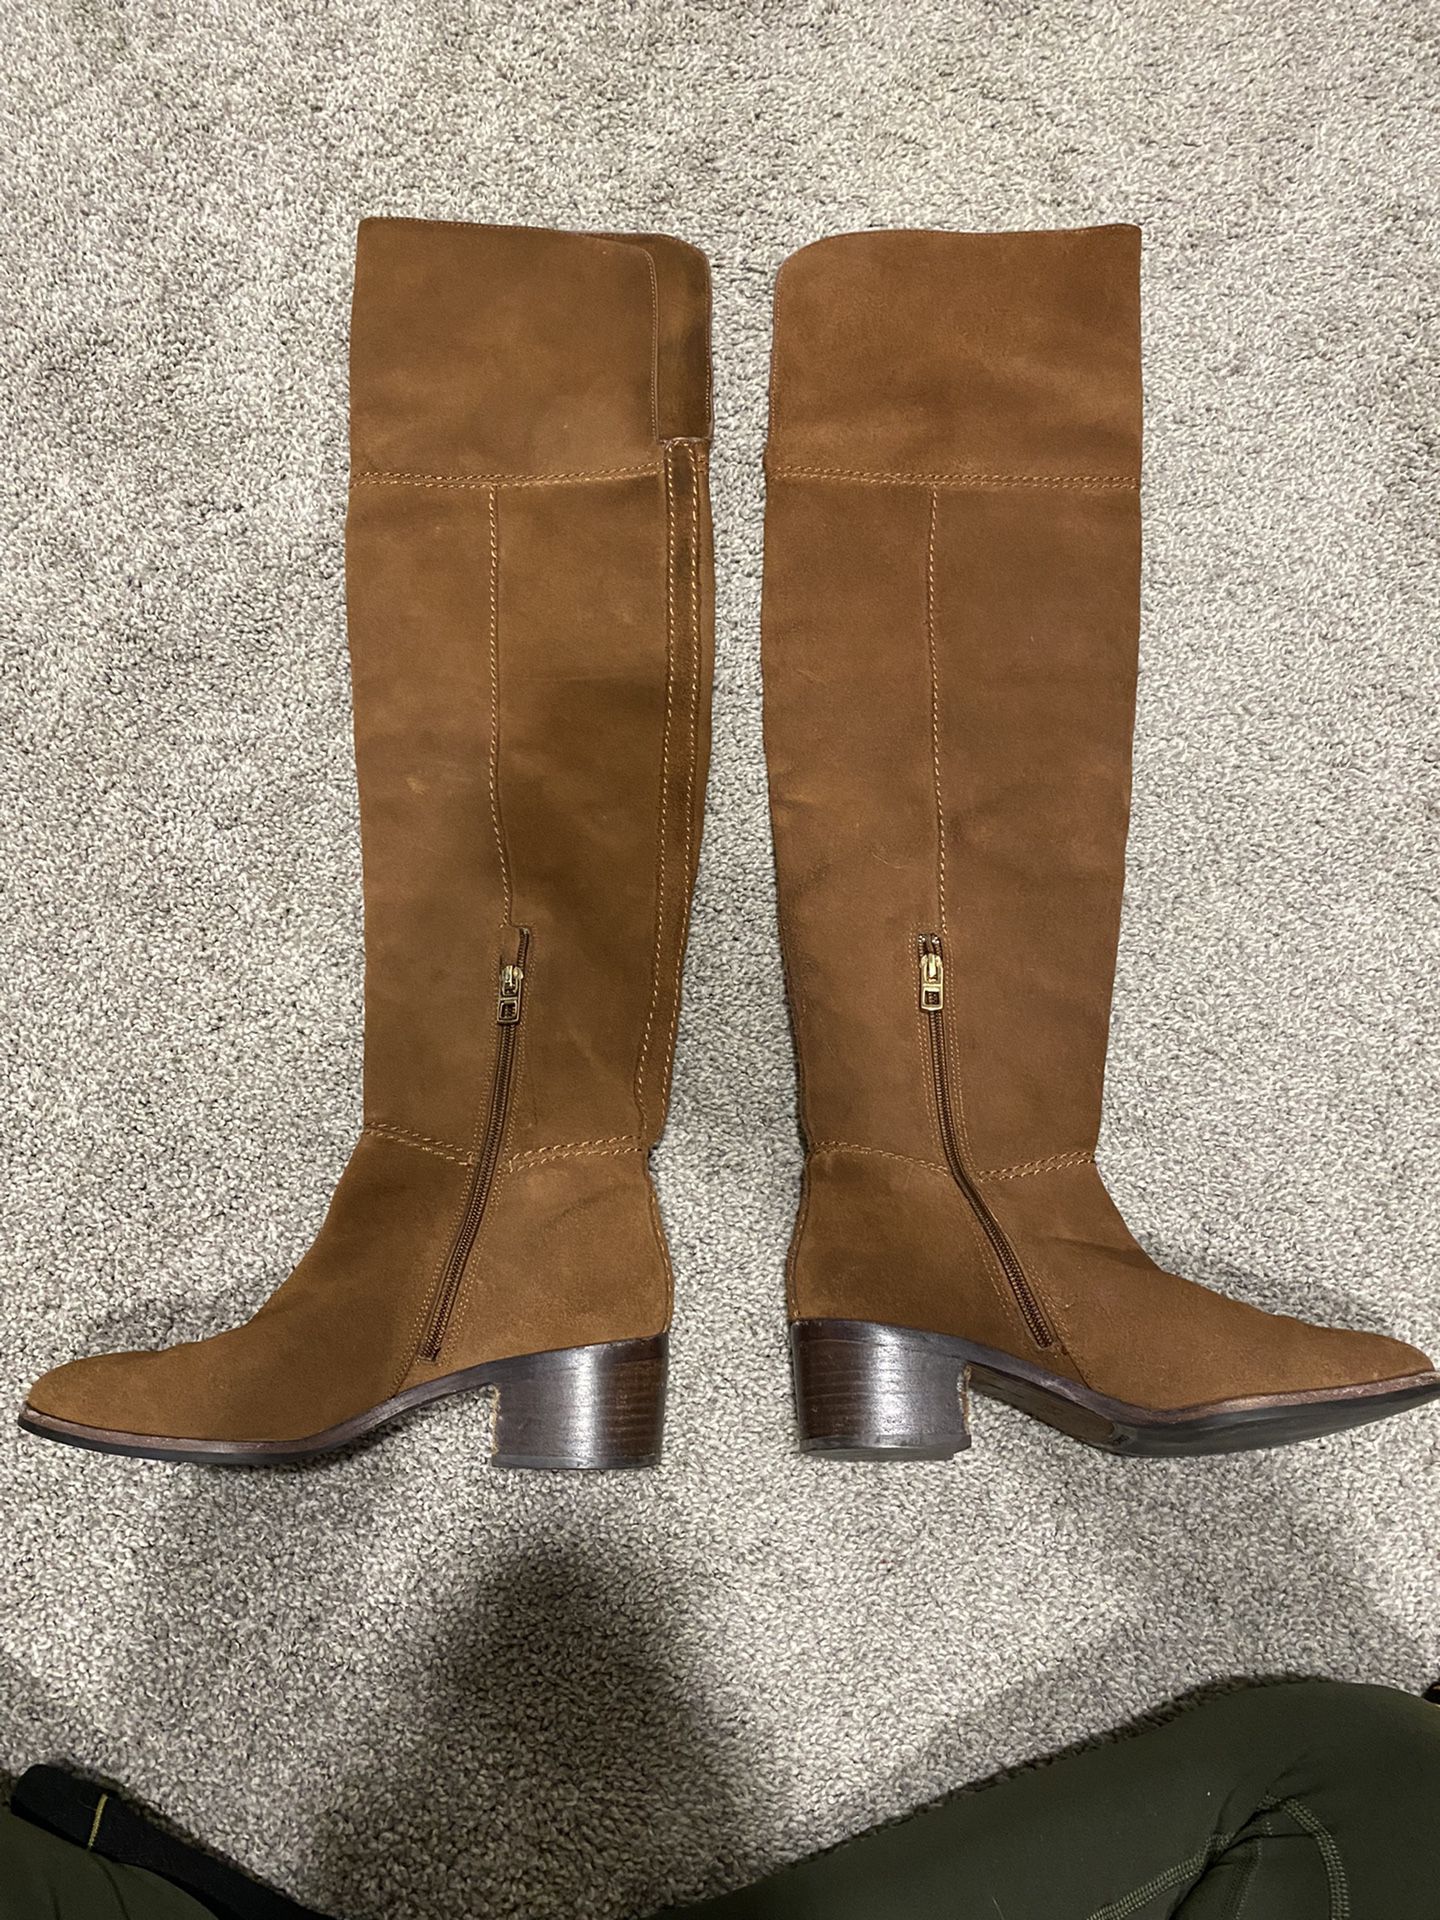 Coach Knee Length Riding Boots